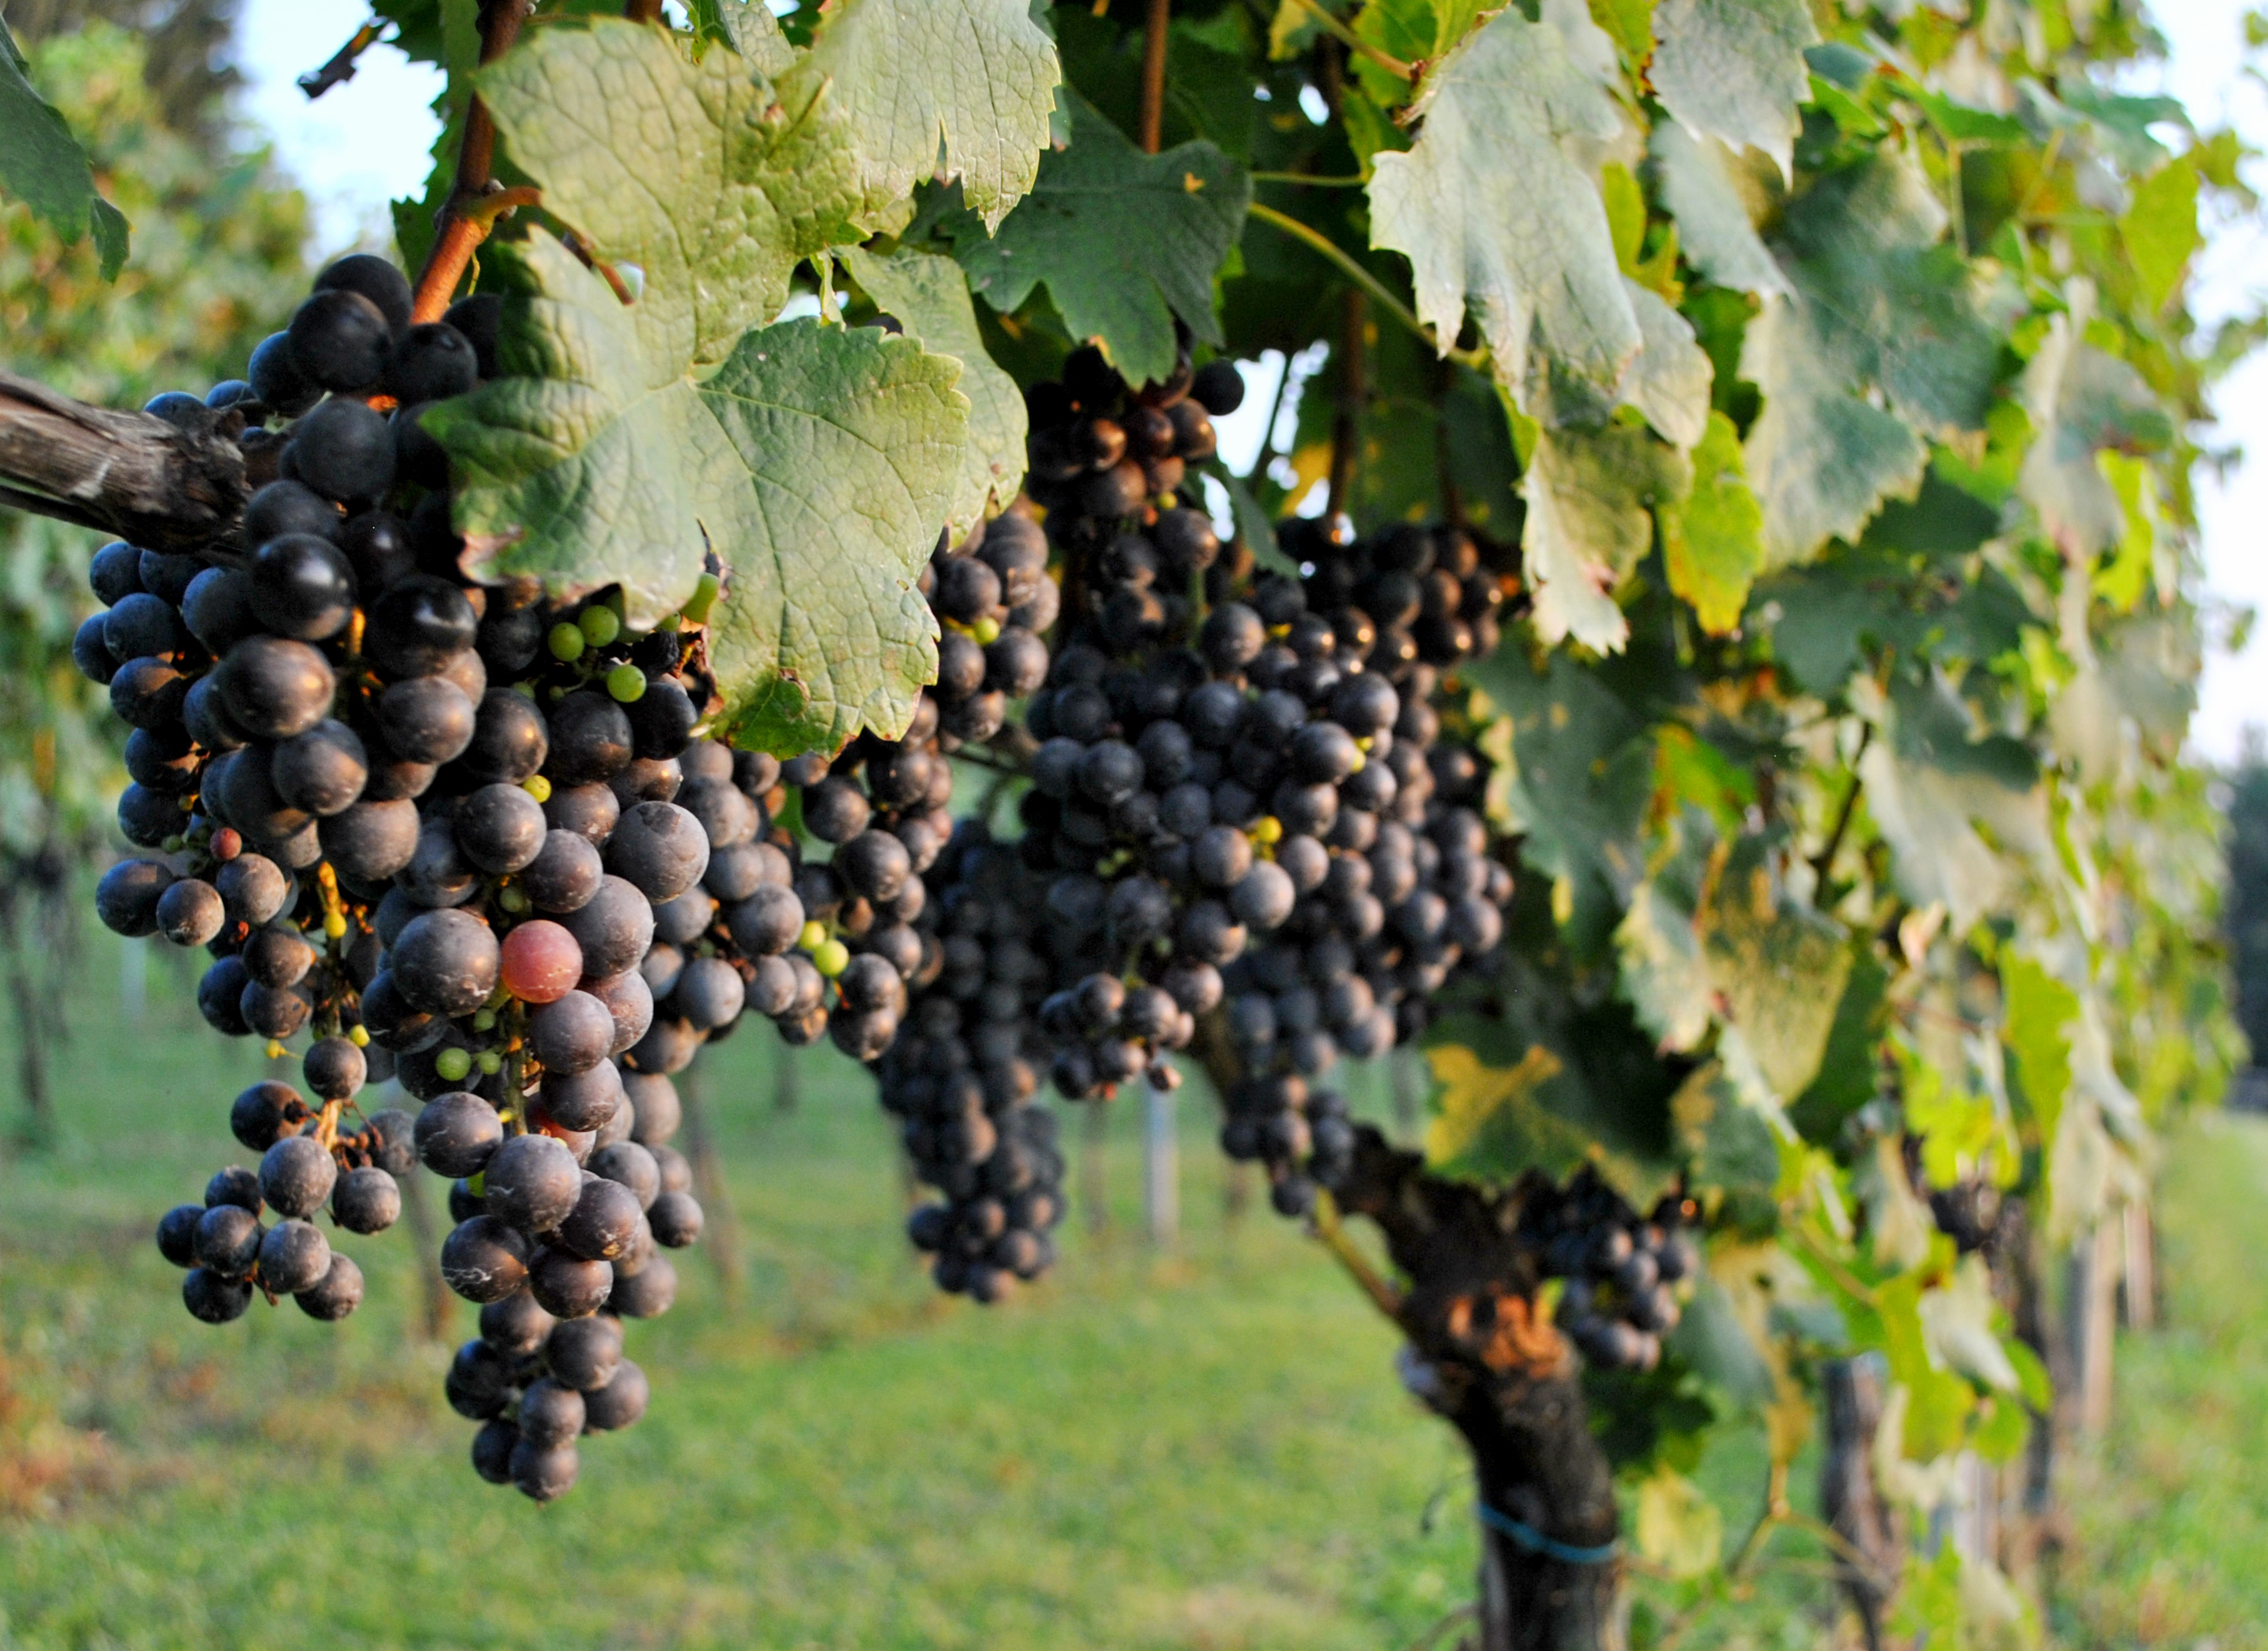 Red grapes on a vine in vineyard in Maryland, USA